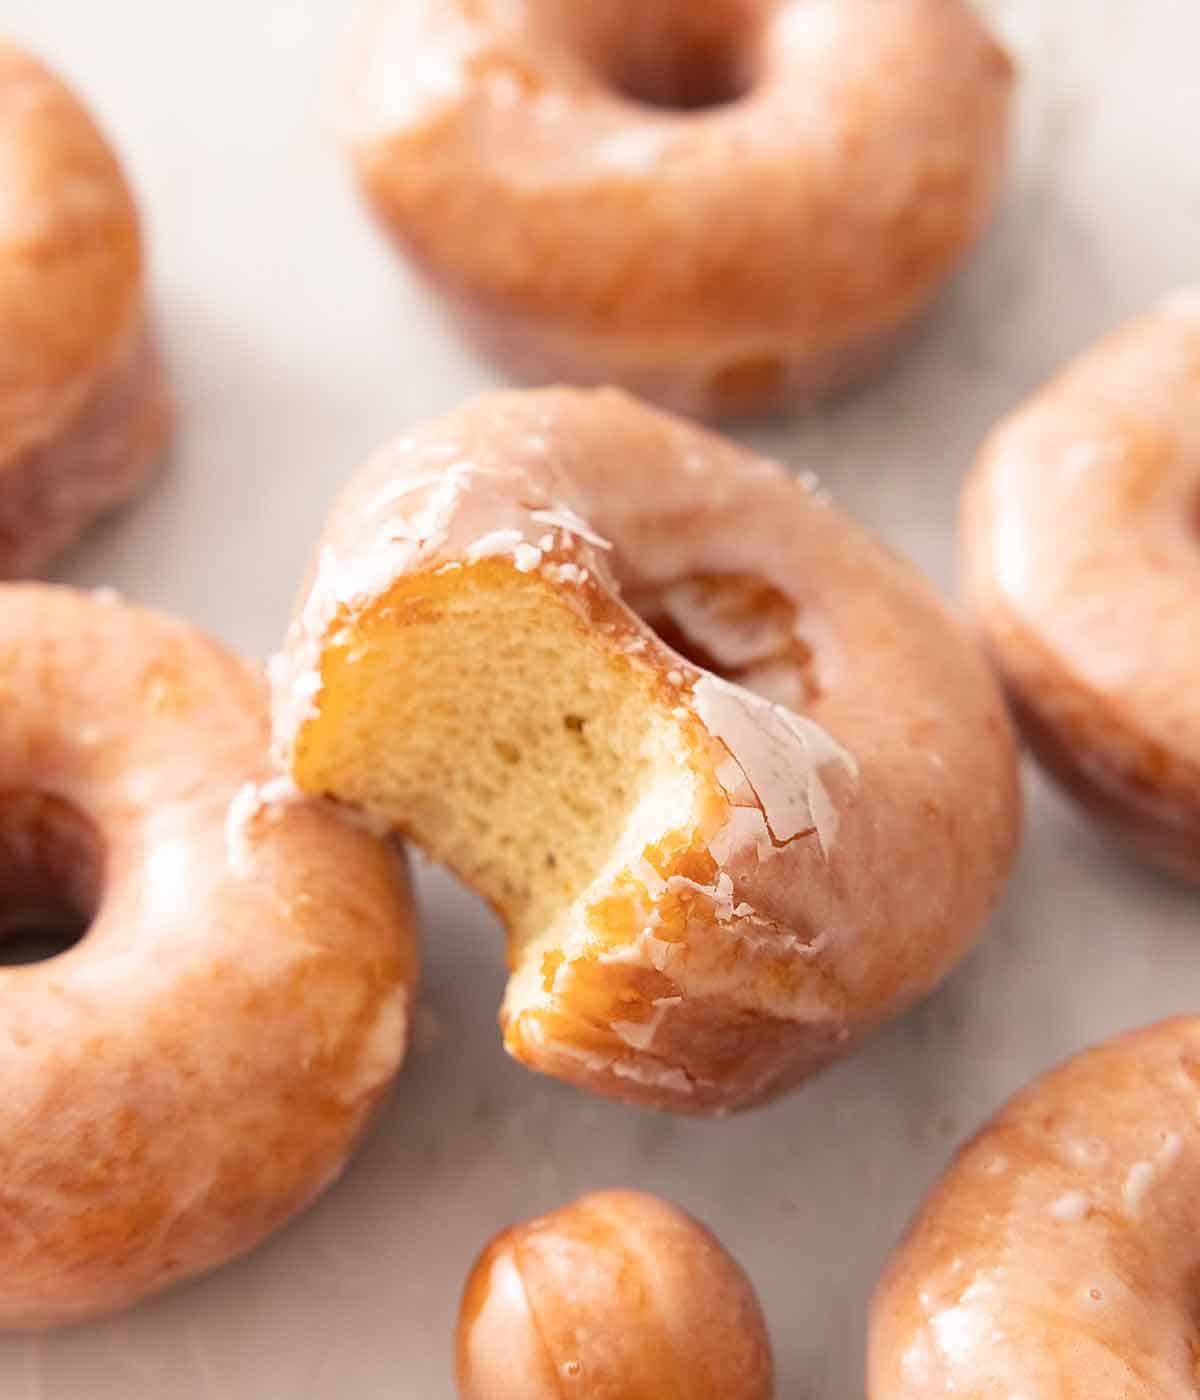 A glazed donut with a bite taken out of it propped on top of more glazed donuts.